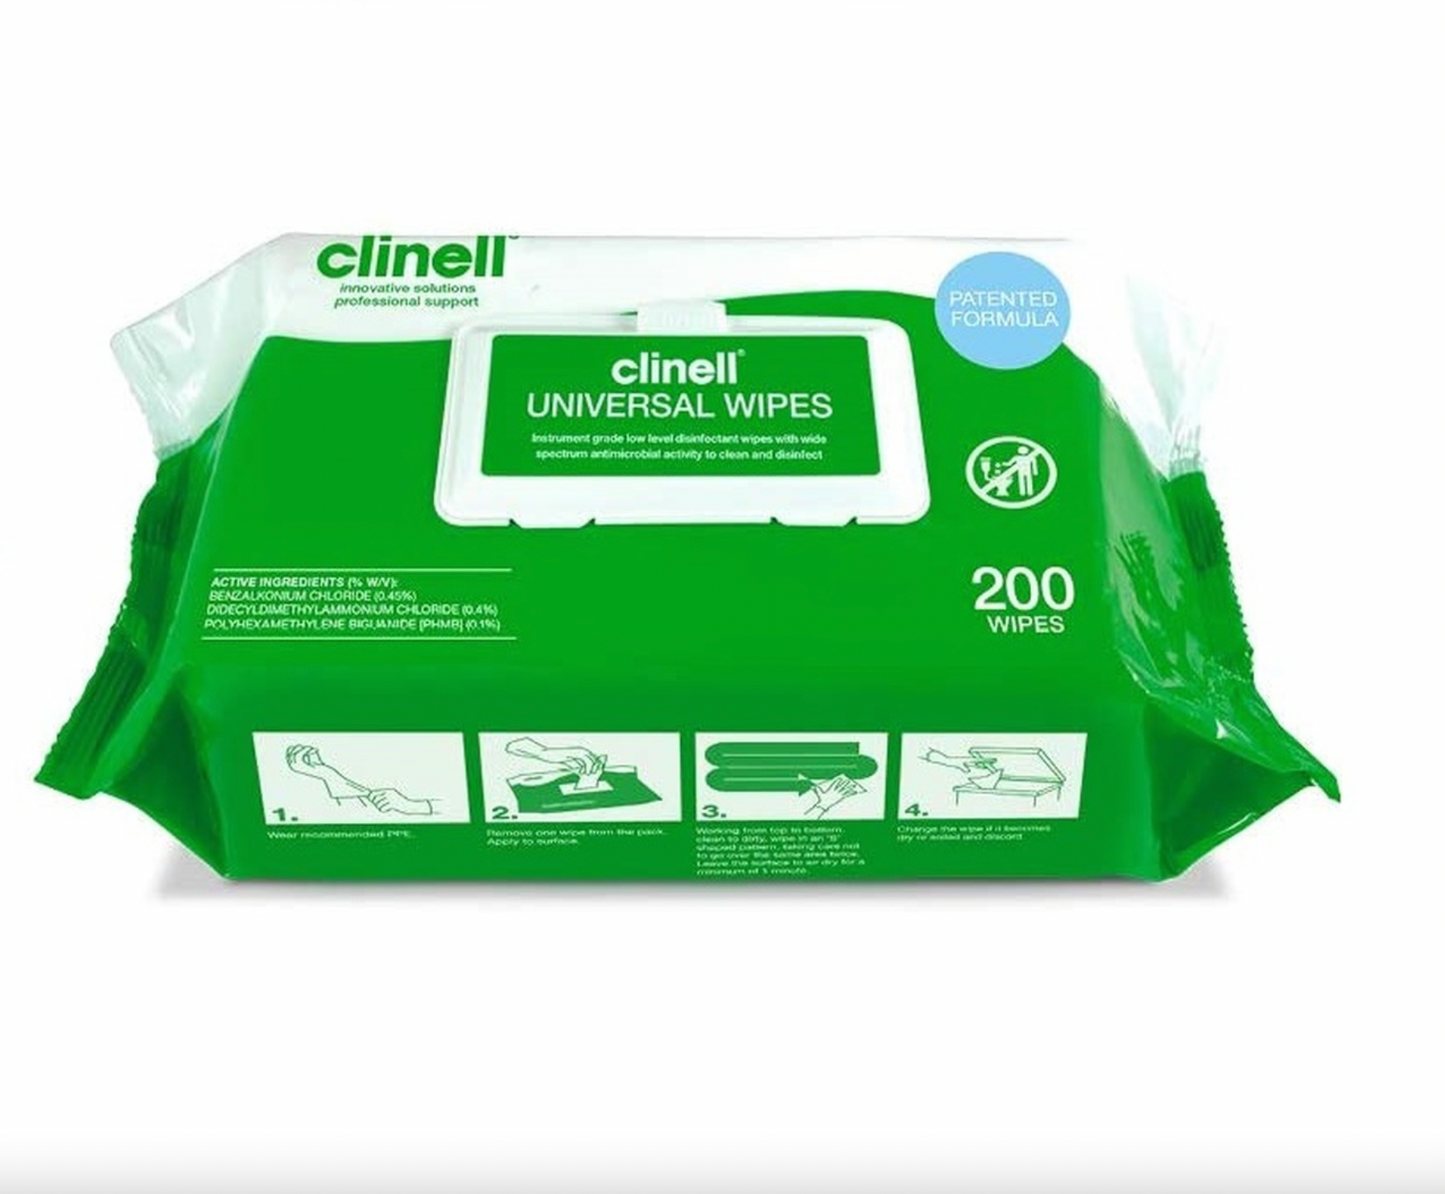 Clinell Wipes (200 wipes)